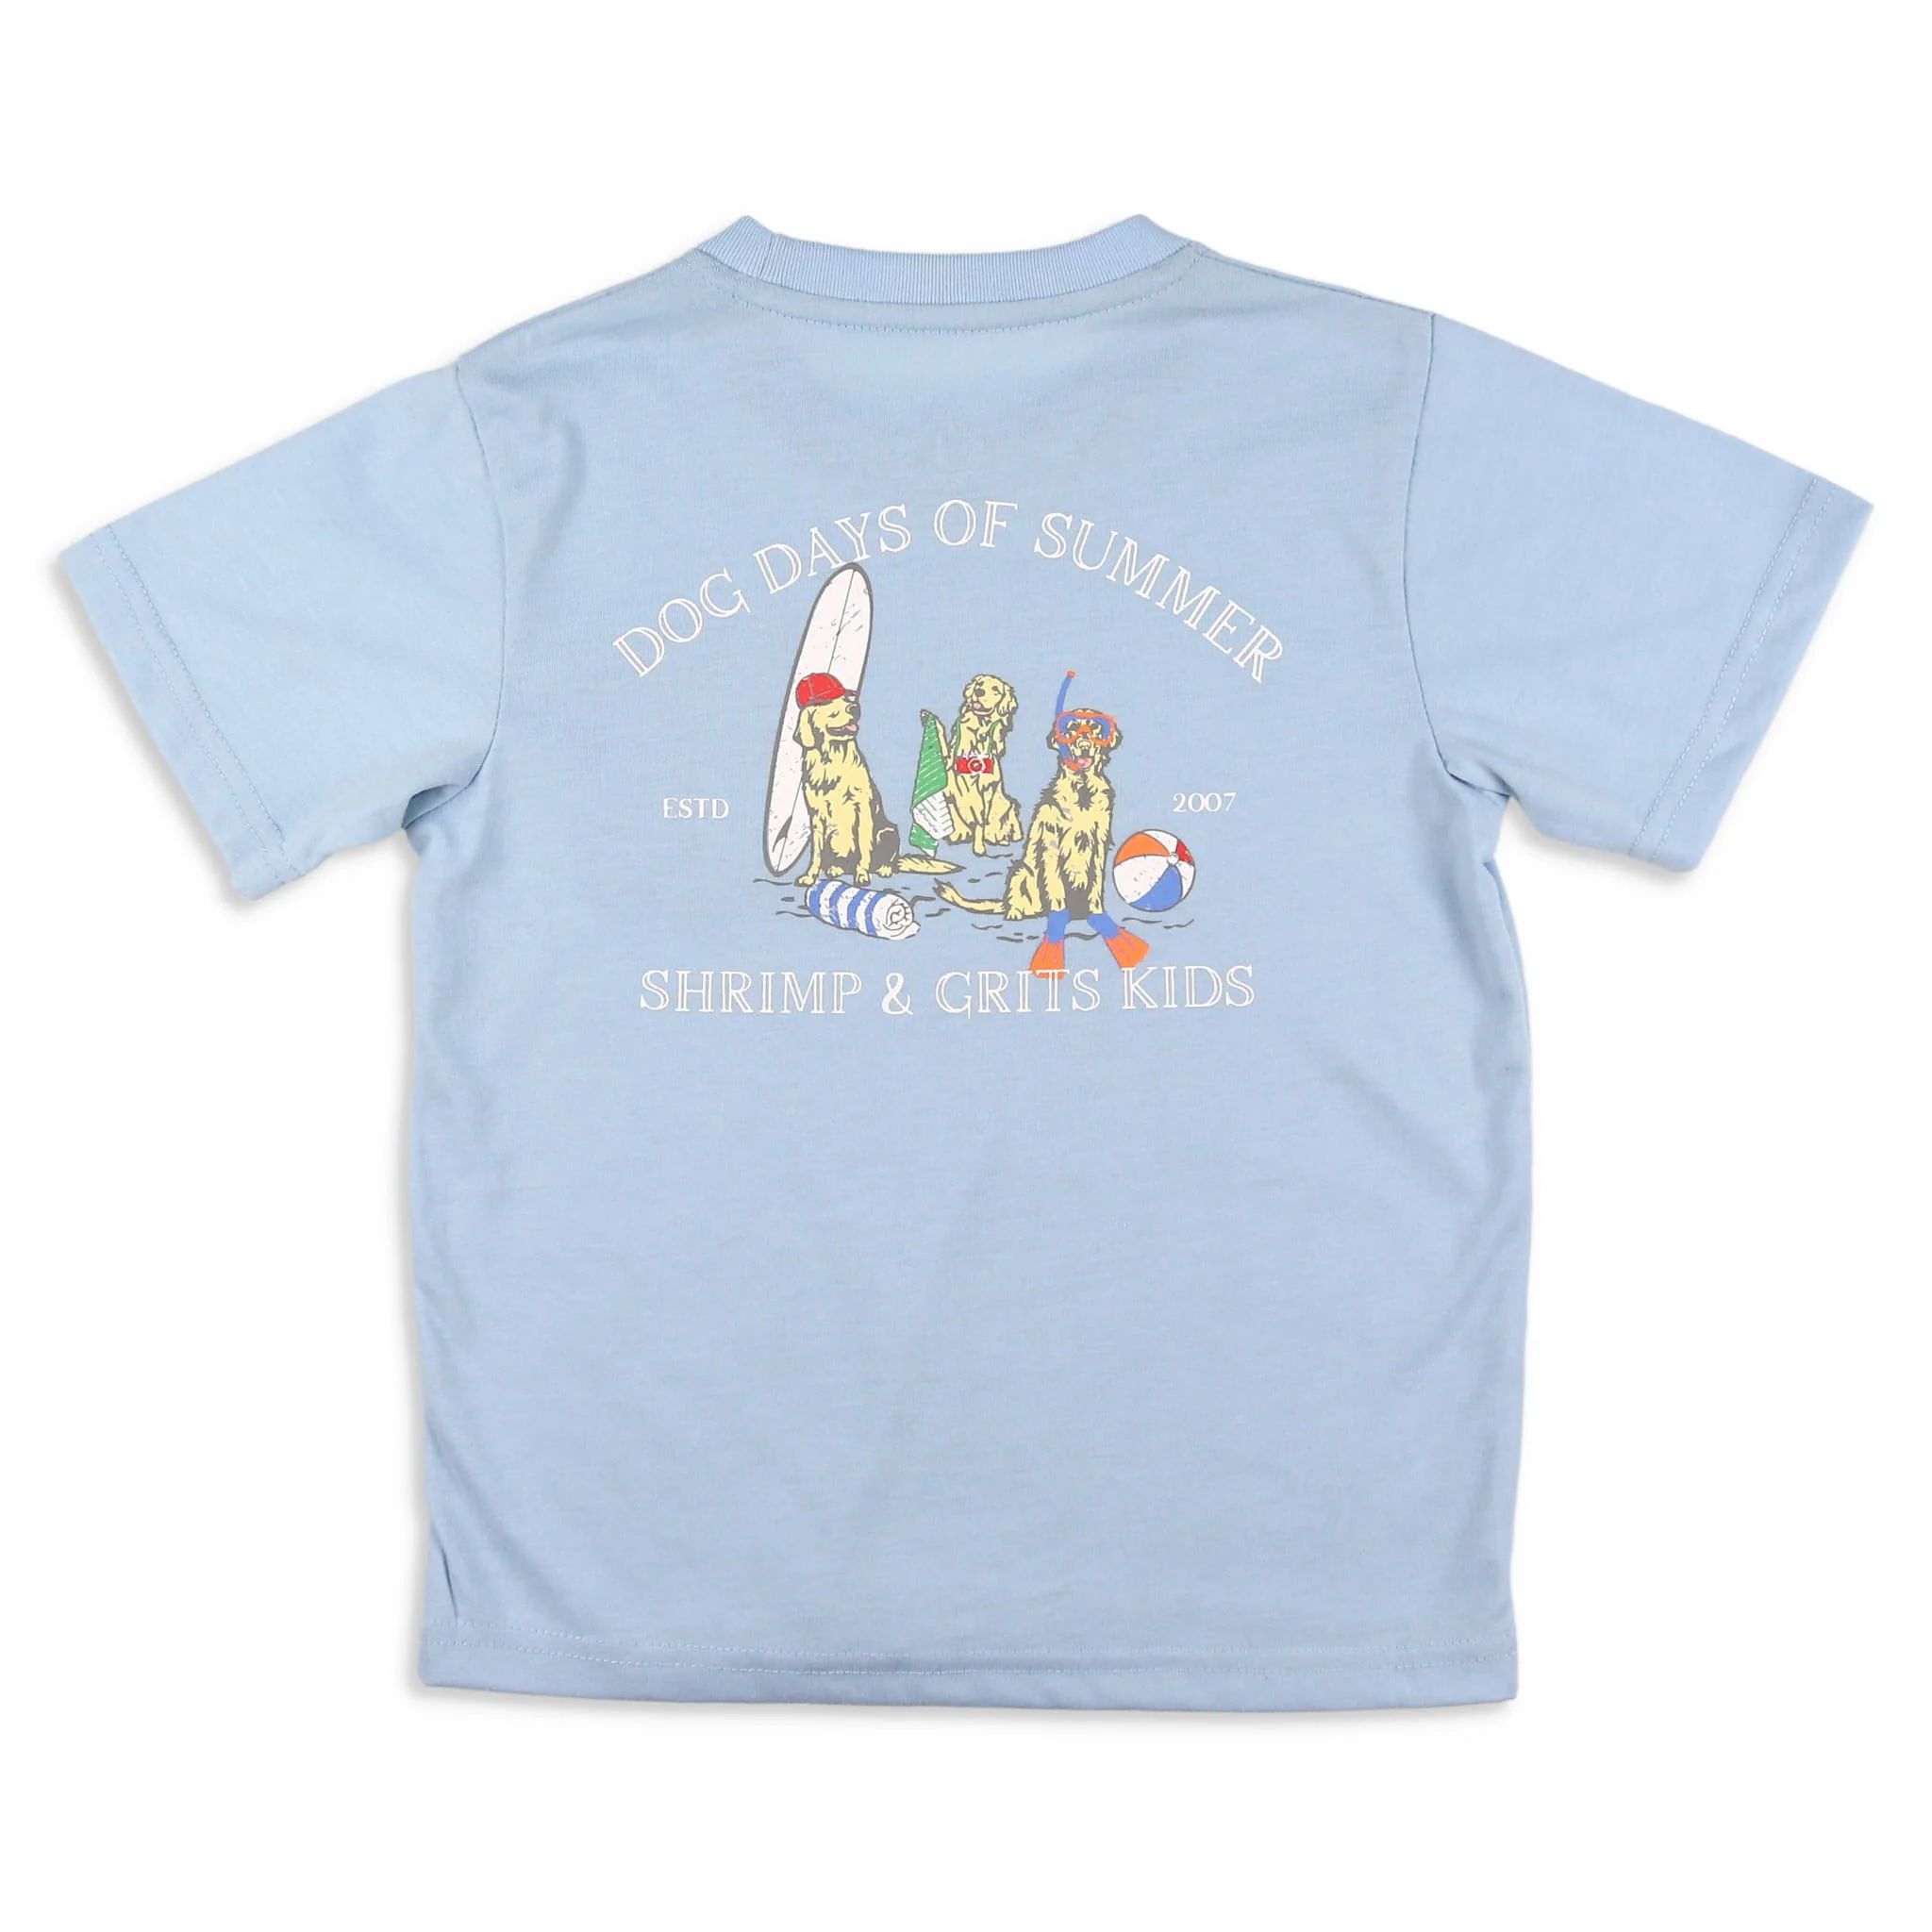 Boys Dog Days of Summer Graphic Tee - Shrimp and Grits Kids | Shrimp and Grits Kids